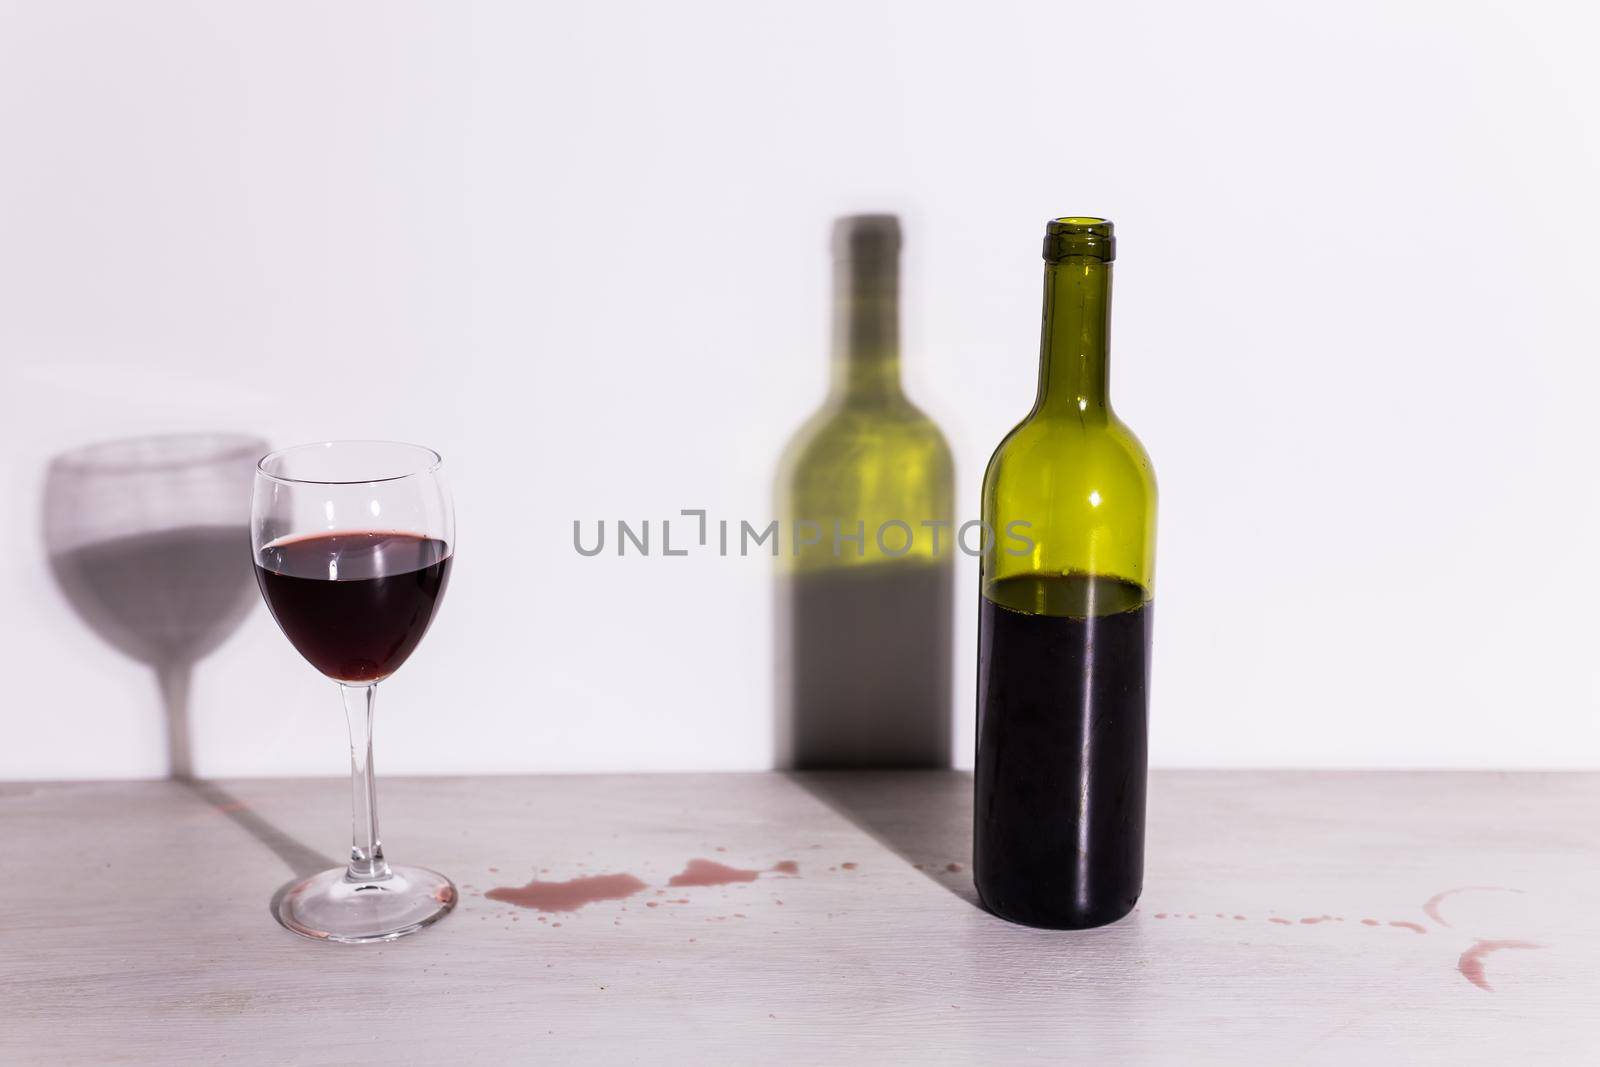 Bottle with wine and glass, red puddle of wine on the table. Cleaning after party concept. by Satura86